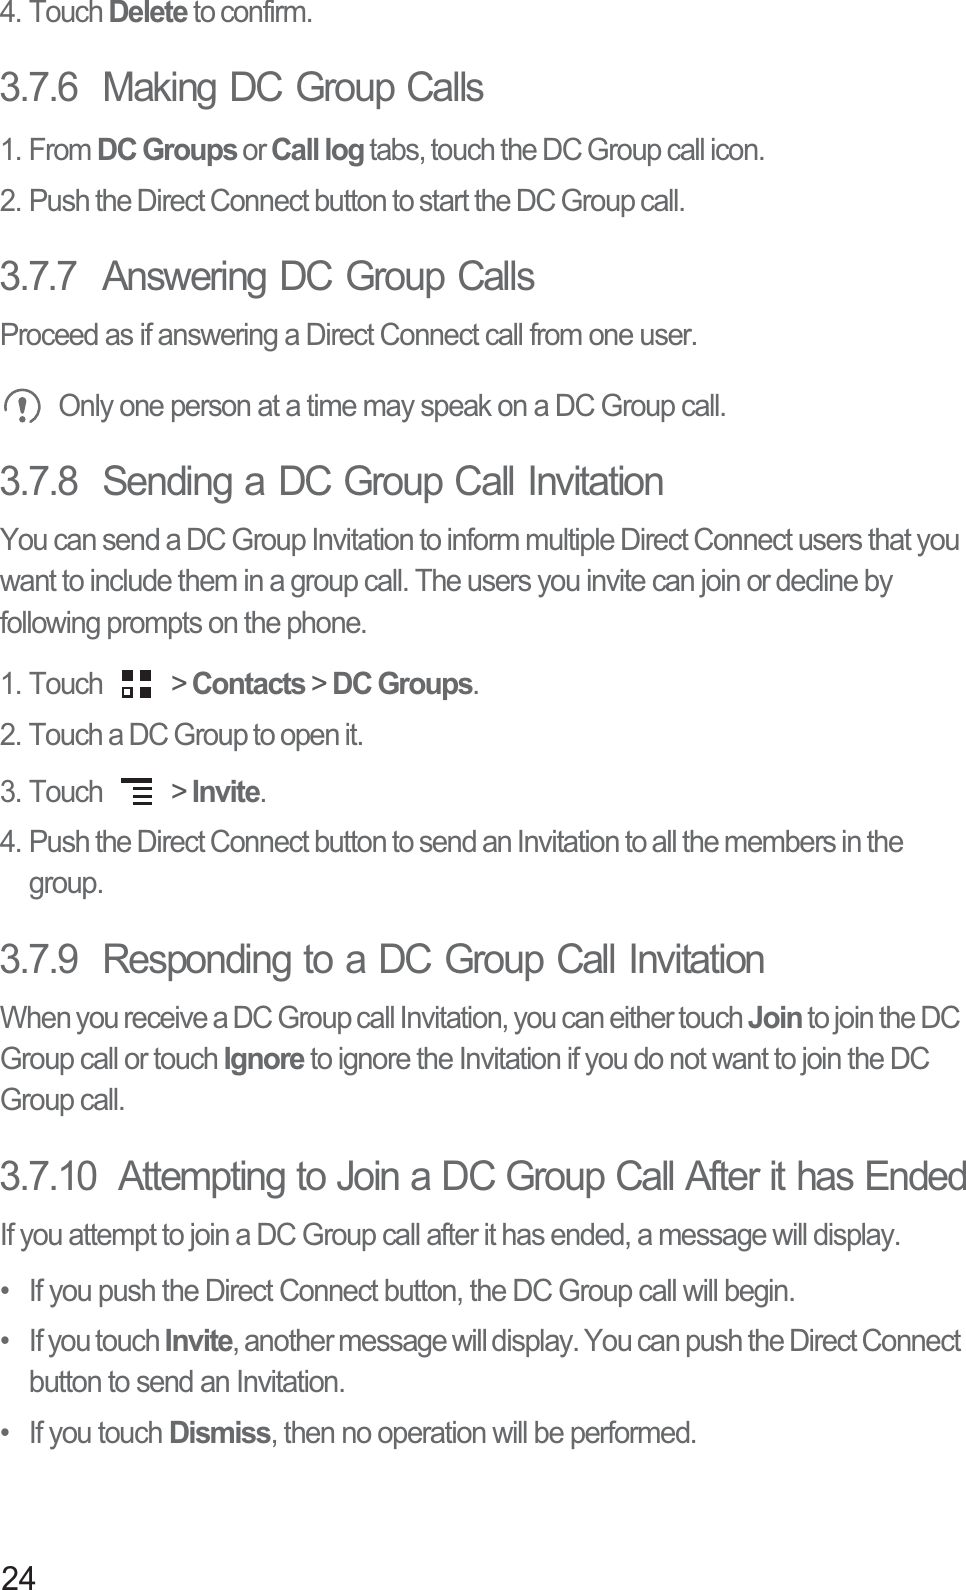 244. Touch Delete to confirm.3.7.6  Making DC Group Calls1. From DC Groups or Call log tabs, touch the DC Group call icon.2. Push the Direct Connect button to start the DC Group call.3.7.7  Answering DC Group CallsProceed as if answering a Direct Connect call from one user. Only one person at a time may speak on a DC Group call.3.7.8  Sending a DC Group Call InvitationYou can send a DC Group Invitation to inform multiple Direct Connect users that you want to include them in a group call. The users you invite can join or decline by following prompts on the phone.1. Touch   &gt; Contacts &gt; DC Groups.2. Touch a DC Group to open it.3. Touch   &gt; Invite.4. Push the Direct Connect button to send an Invitation to all the members in the group.3.7.9  Responding to a DC Group Call InvitationWhen you receive a DC Group call Invitation, you can either touch Join to join the DC Group call or touch Ignore to ignore the Invitation if you do not want to join the DC Group call.3.7.10  Attempting to Join a DC Group Call After it has EndedIf you attempt to join a DC Group call after it has ended, a message will display.•  If you push the Direct Connect button, the DC Group call will begin.• If you touch Invite, another message will display. You can push the Direct Connect button to send an Invitation.•  If you touch Dismiss, then no operation will be performed.